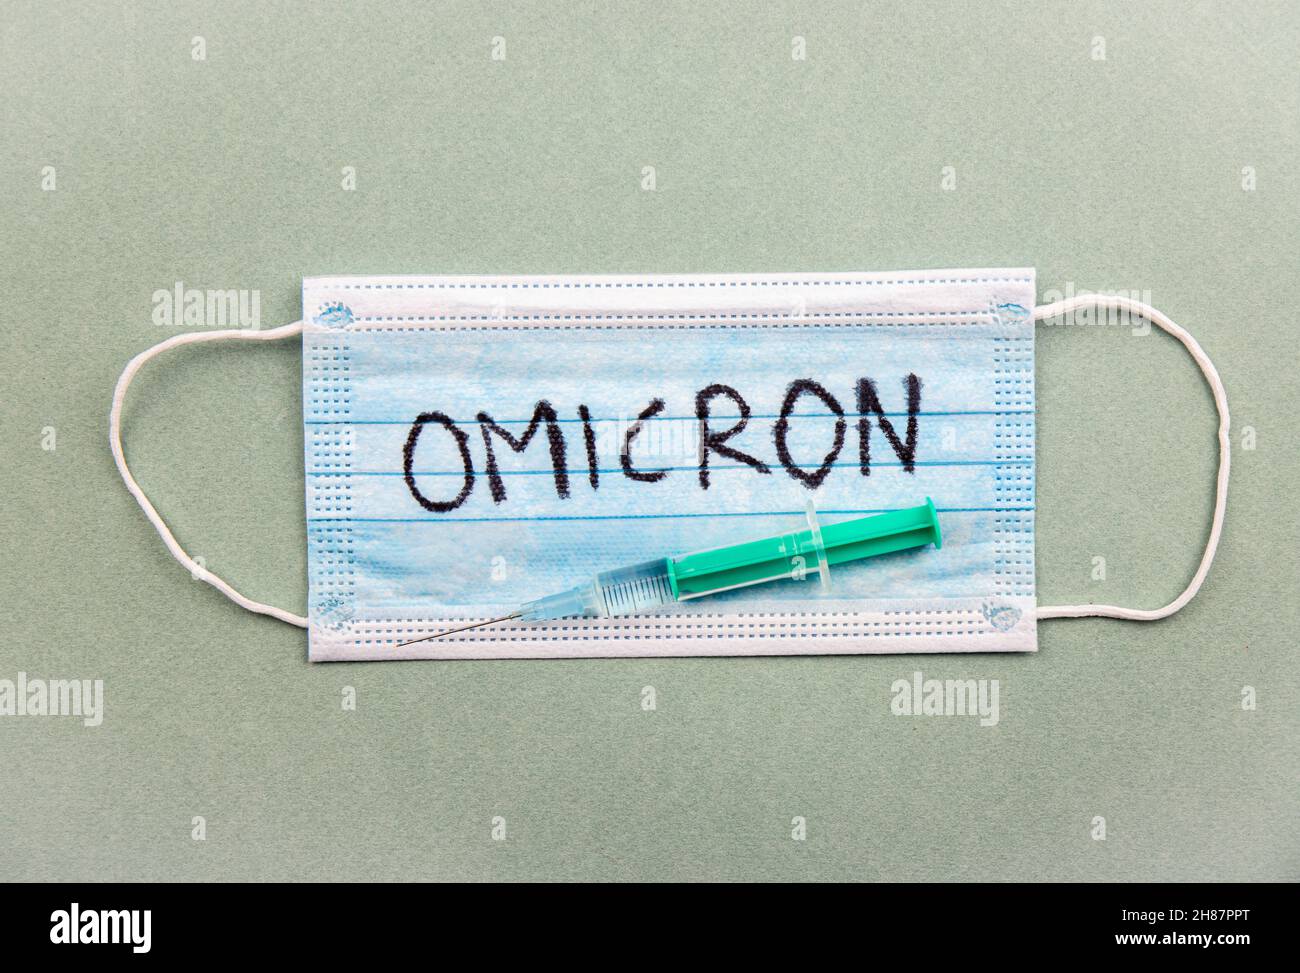 New Coronavirus Covid-19 mutation Omicron concept. Medical mask, syringe and text with letters Omicron. Stock Photo